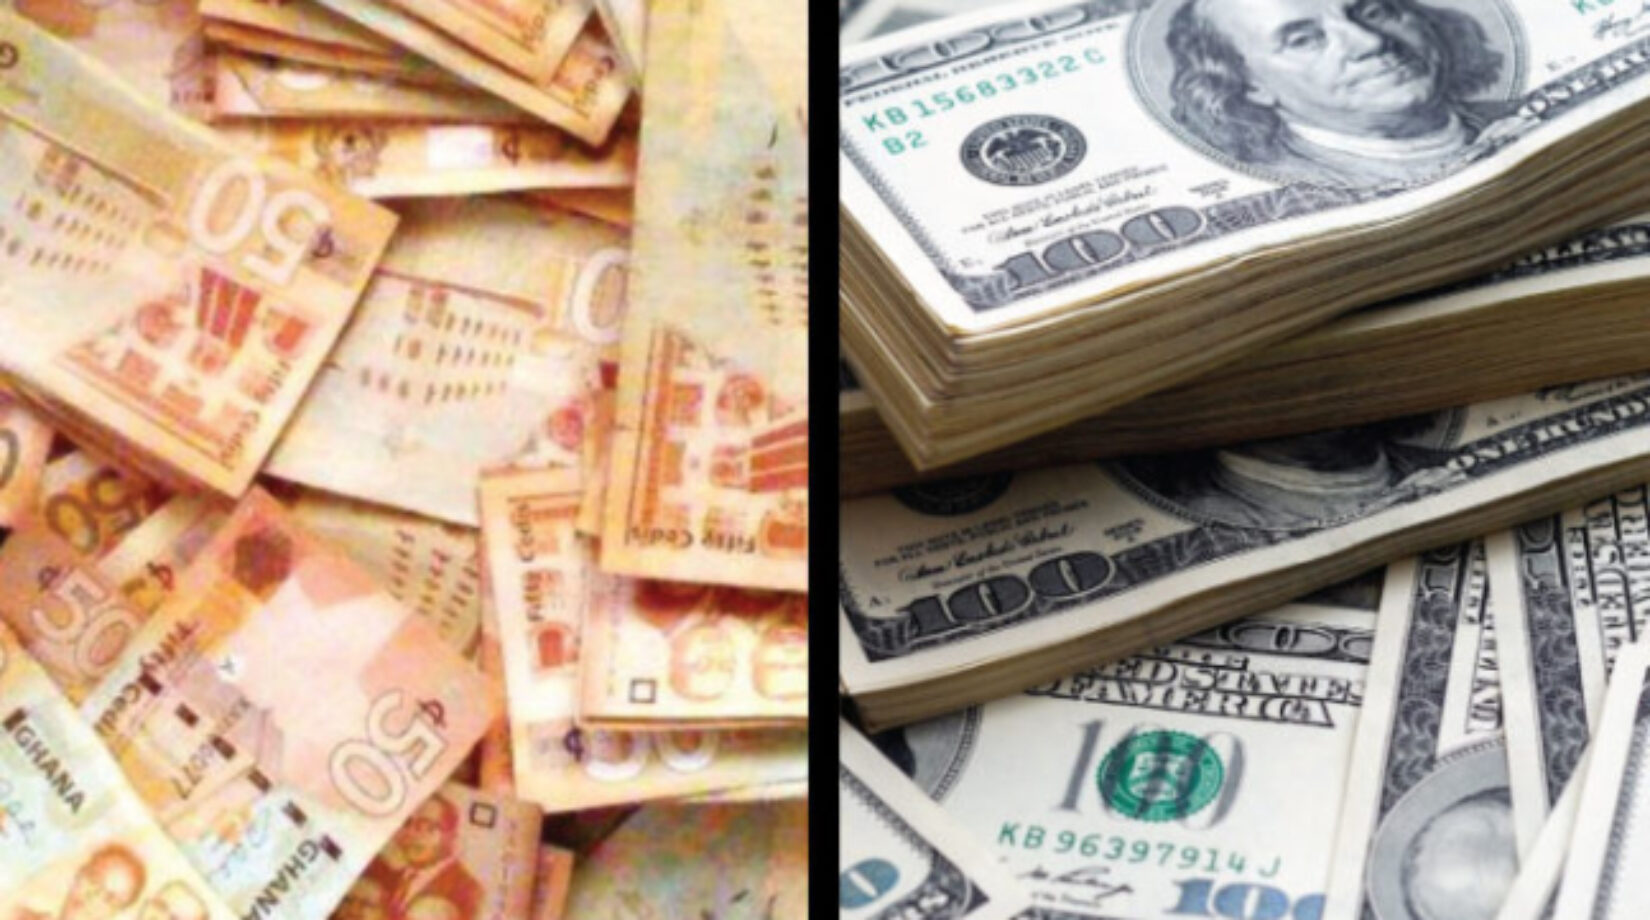 Dollar likely to drop to Ghc 6 very soon-Professor of Economic at Indiana University predicts